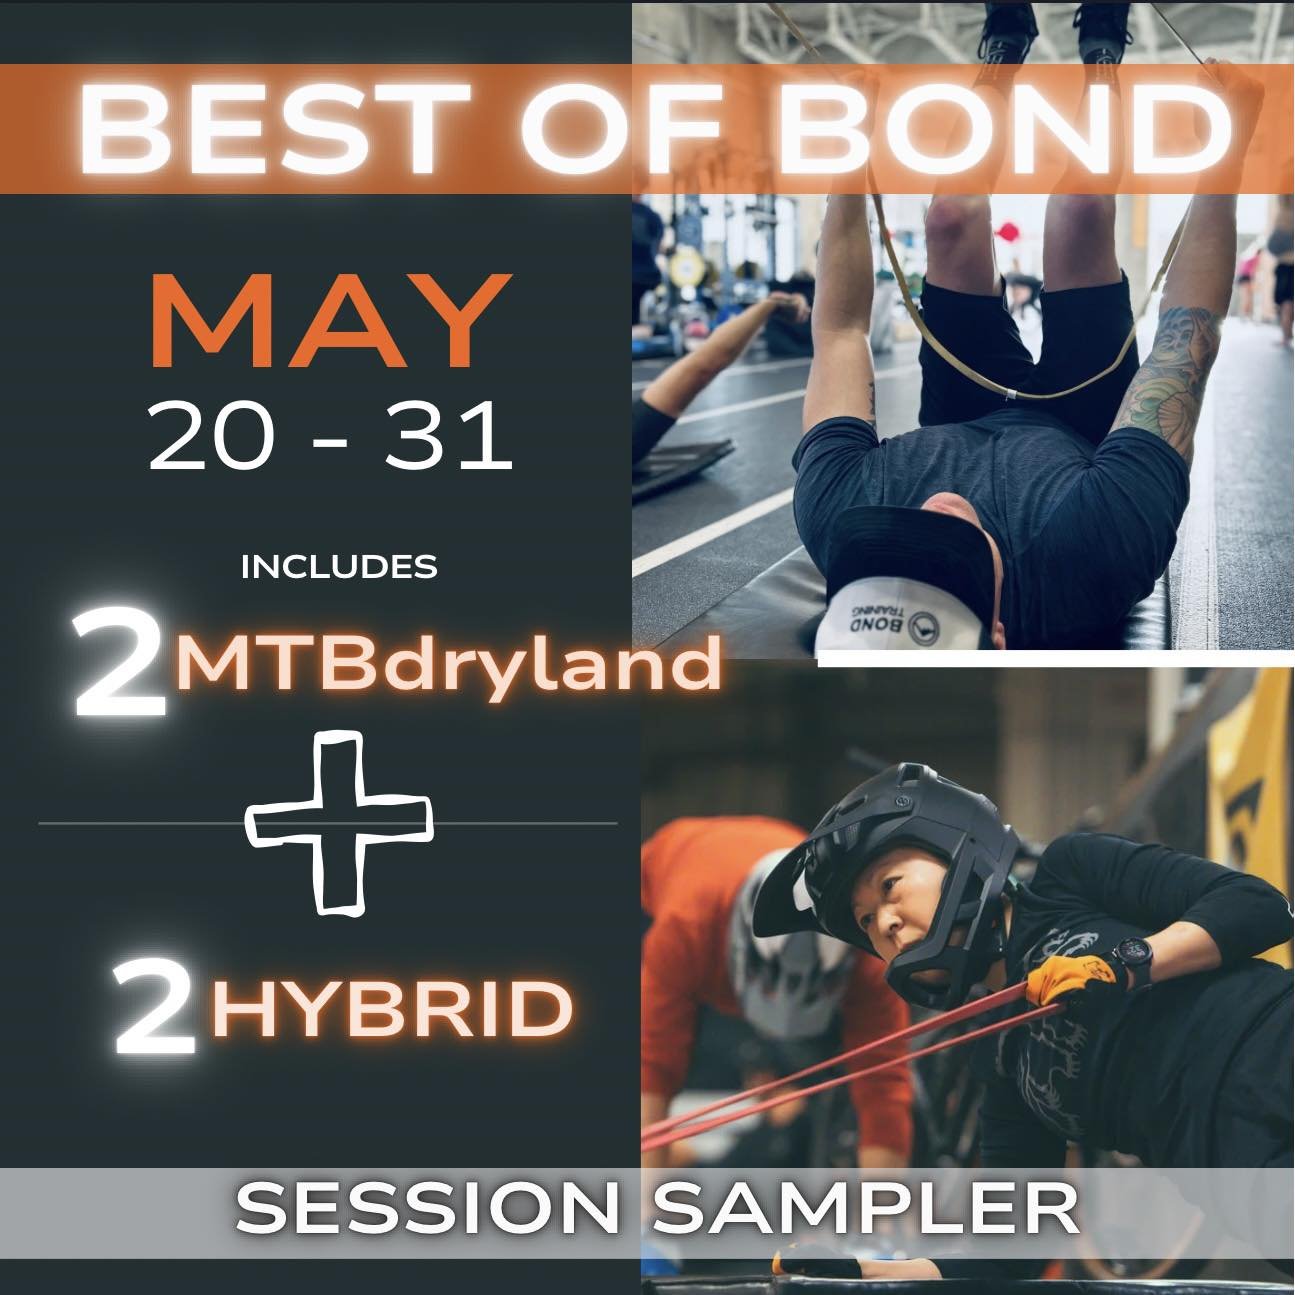 BOOKING NOW 🔗in bio

Our MAY (20-31) BEST OF BOND Session Sampler includes

🔸 2 MTBdryland Sessions 
➕
🔸2 HYBRID Sessions

TOTAL 4 Sessions For $120+gst
(a 25%saving)

This promotion offers an excellent opportunity to come out and try BOTH program